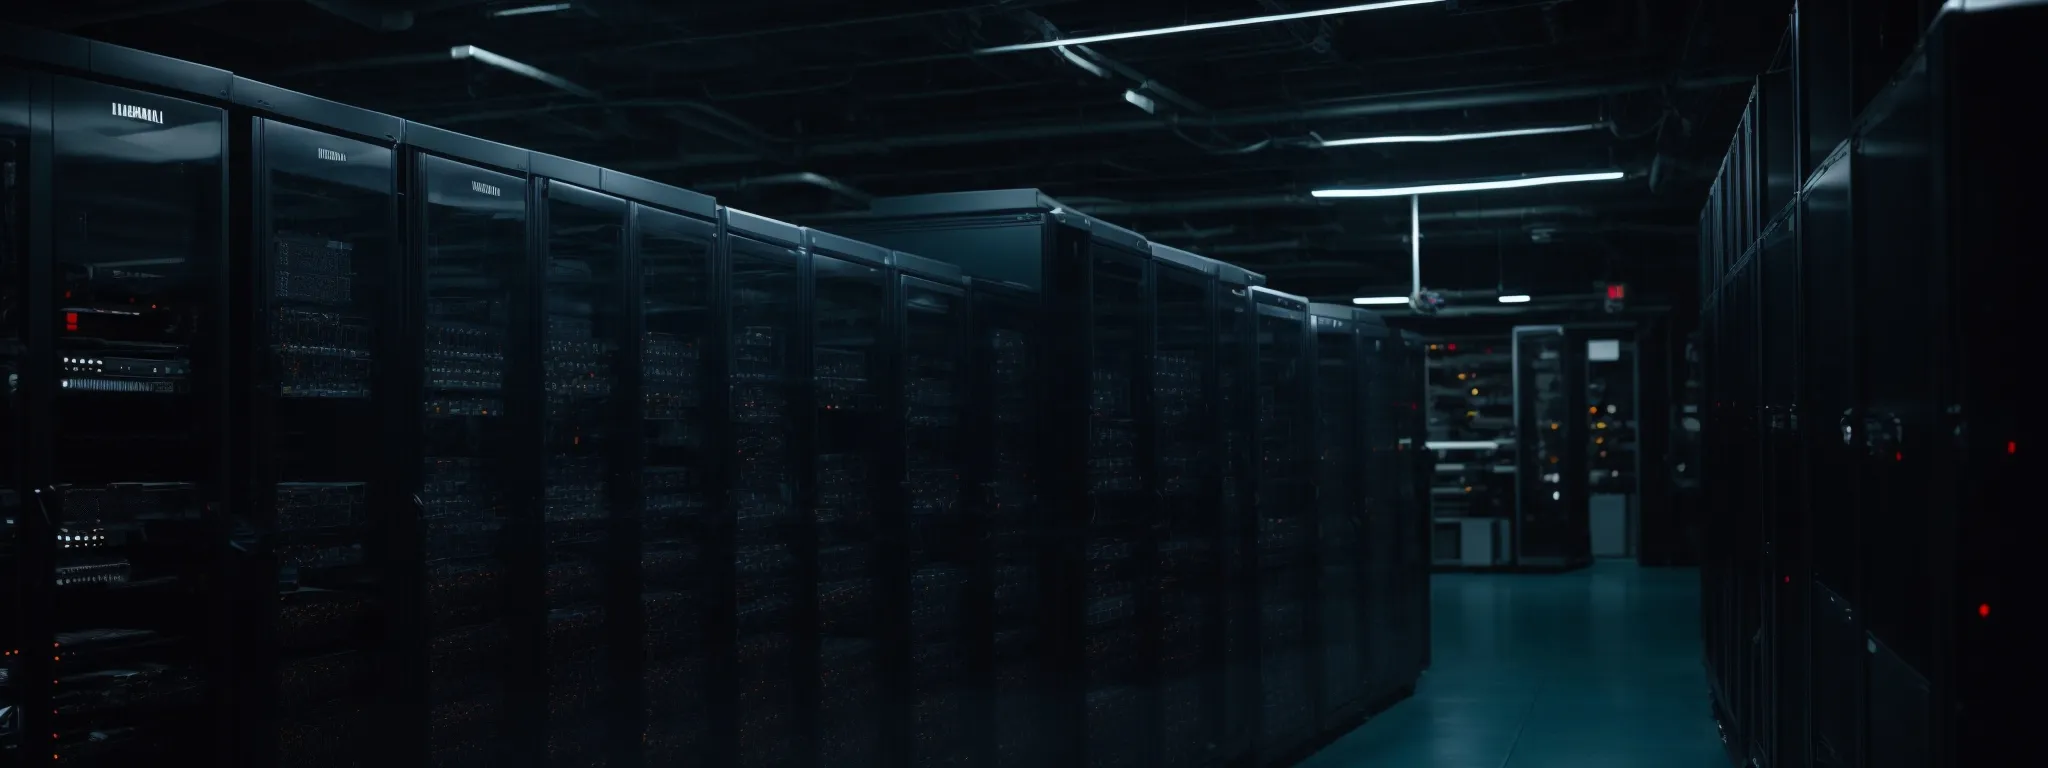 a server room with rows of high-powered computers storing and organizing digital information.